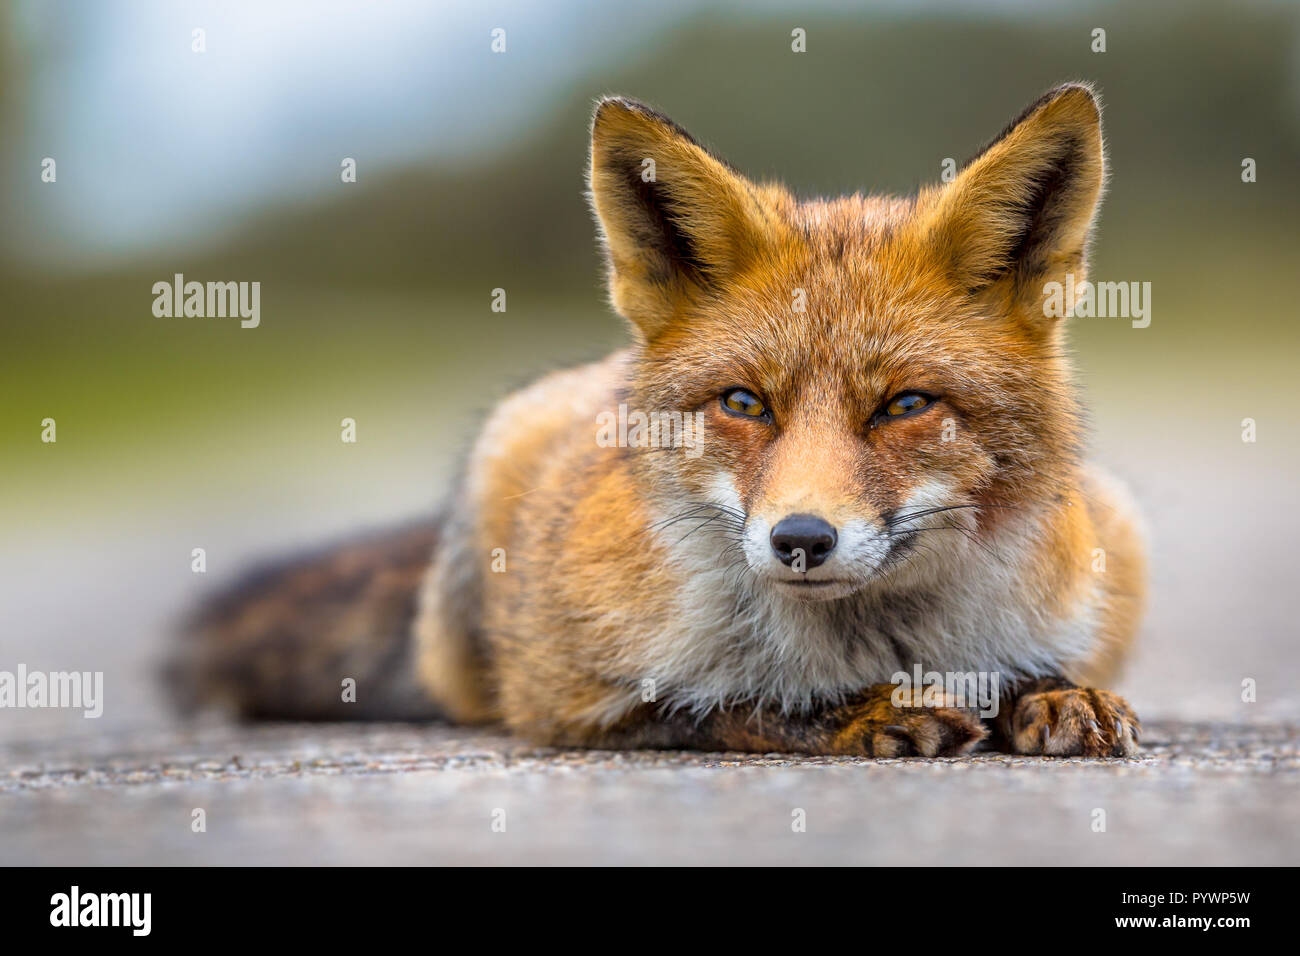 Relaxing European red fox (Vulpes vulpes) lying on the ground. Red Foxes are adaptable and opportunistic omnivores and are capable of successfully occ Stock Photo